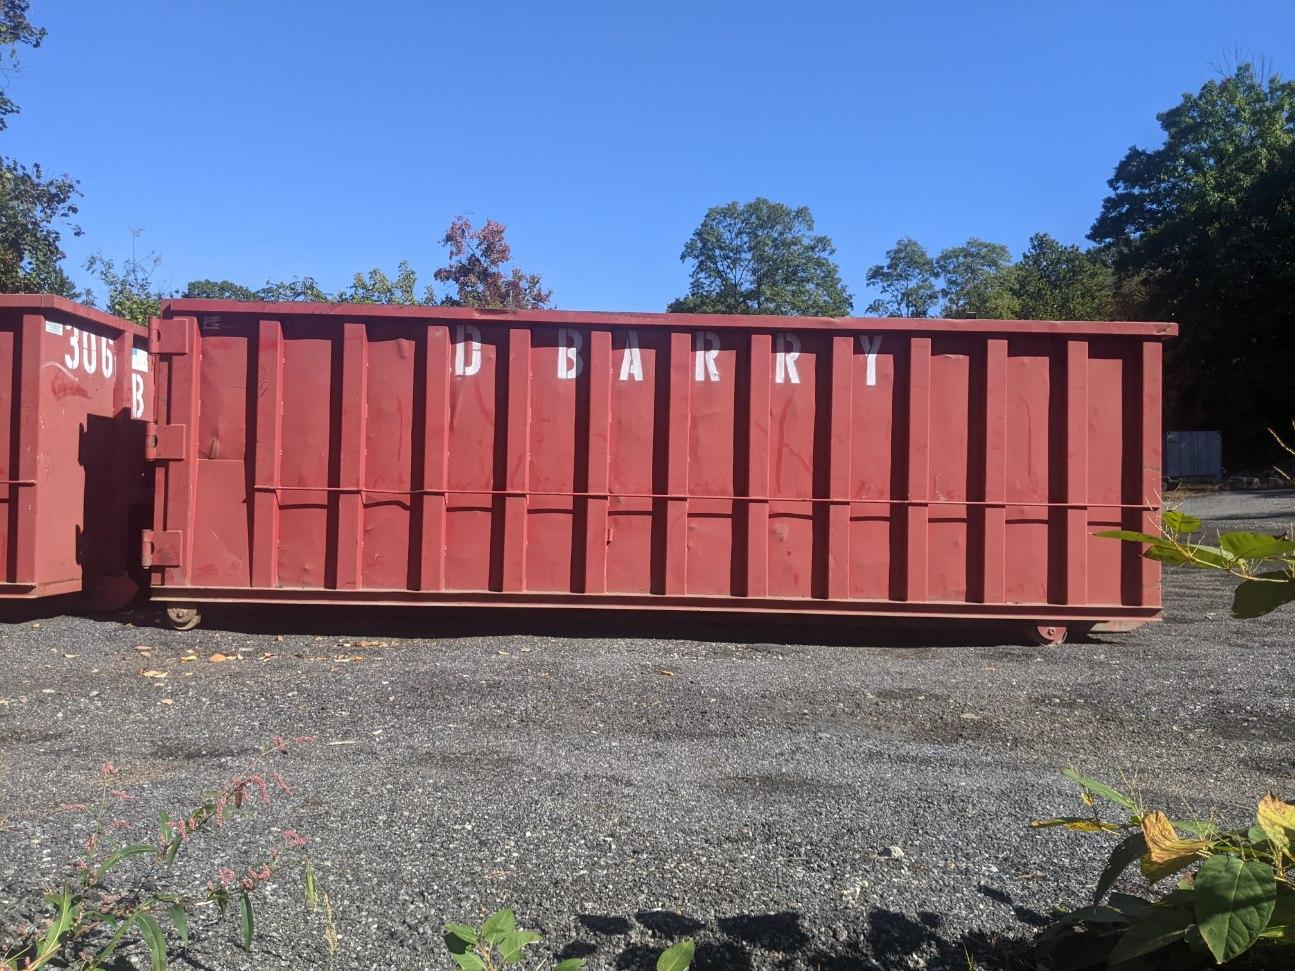 Rental dumpster from D. Barry Rubbish Inc.